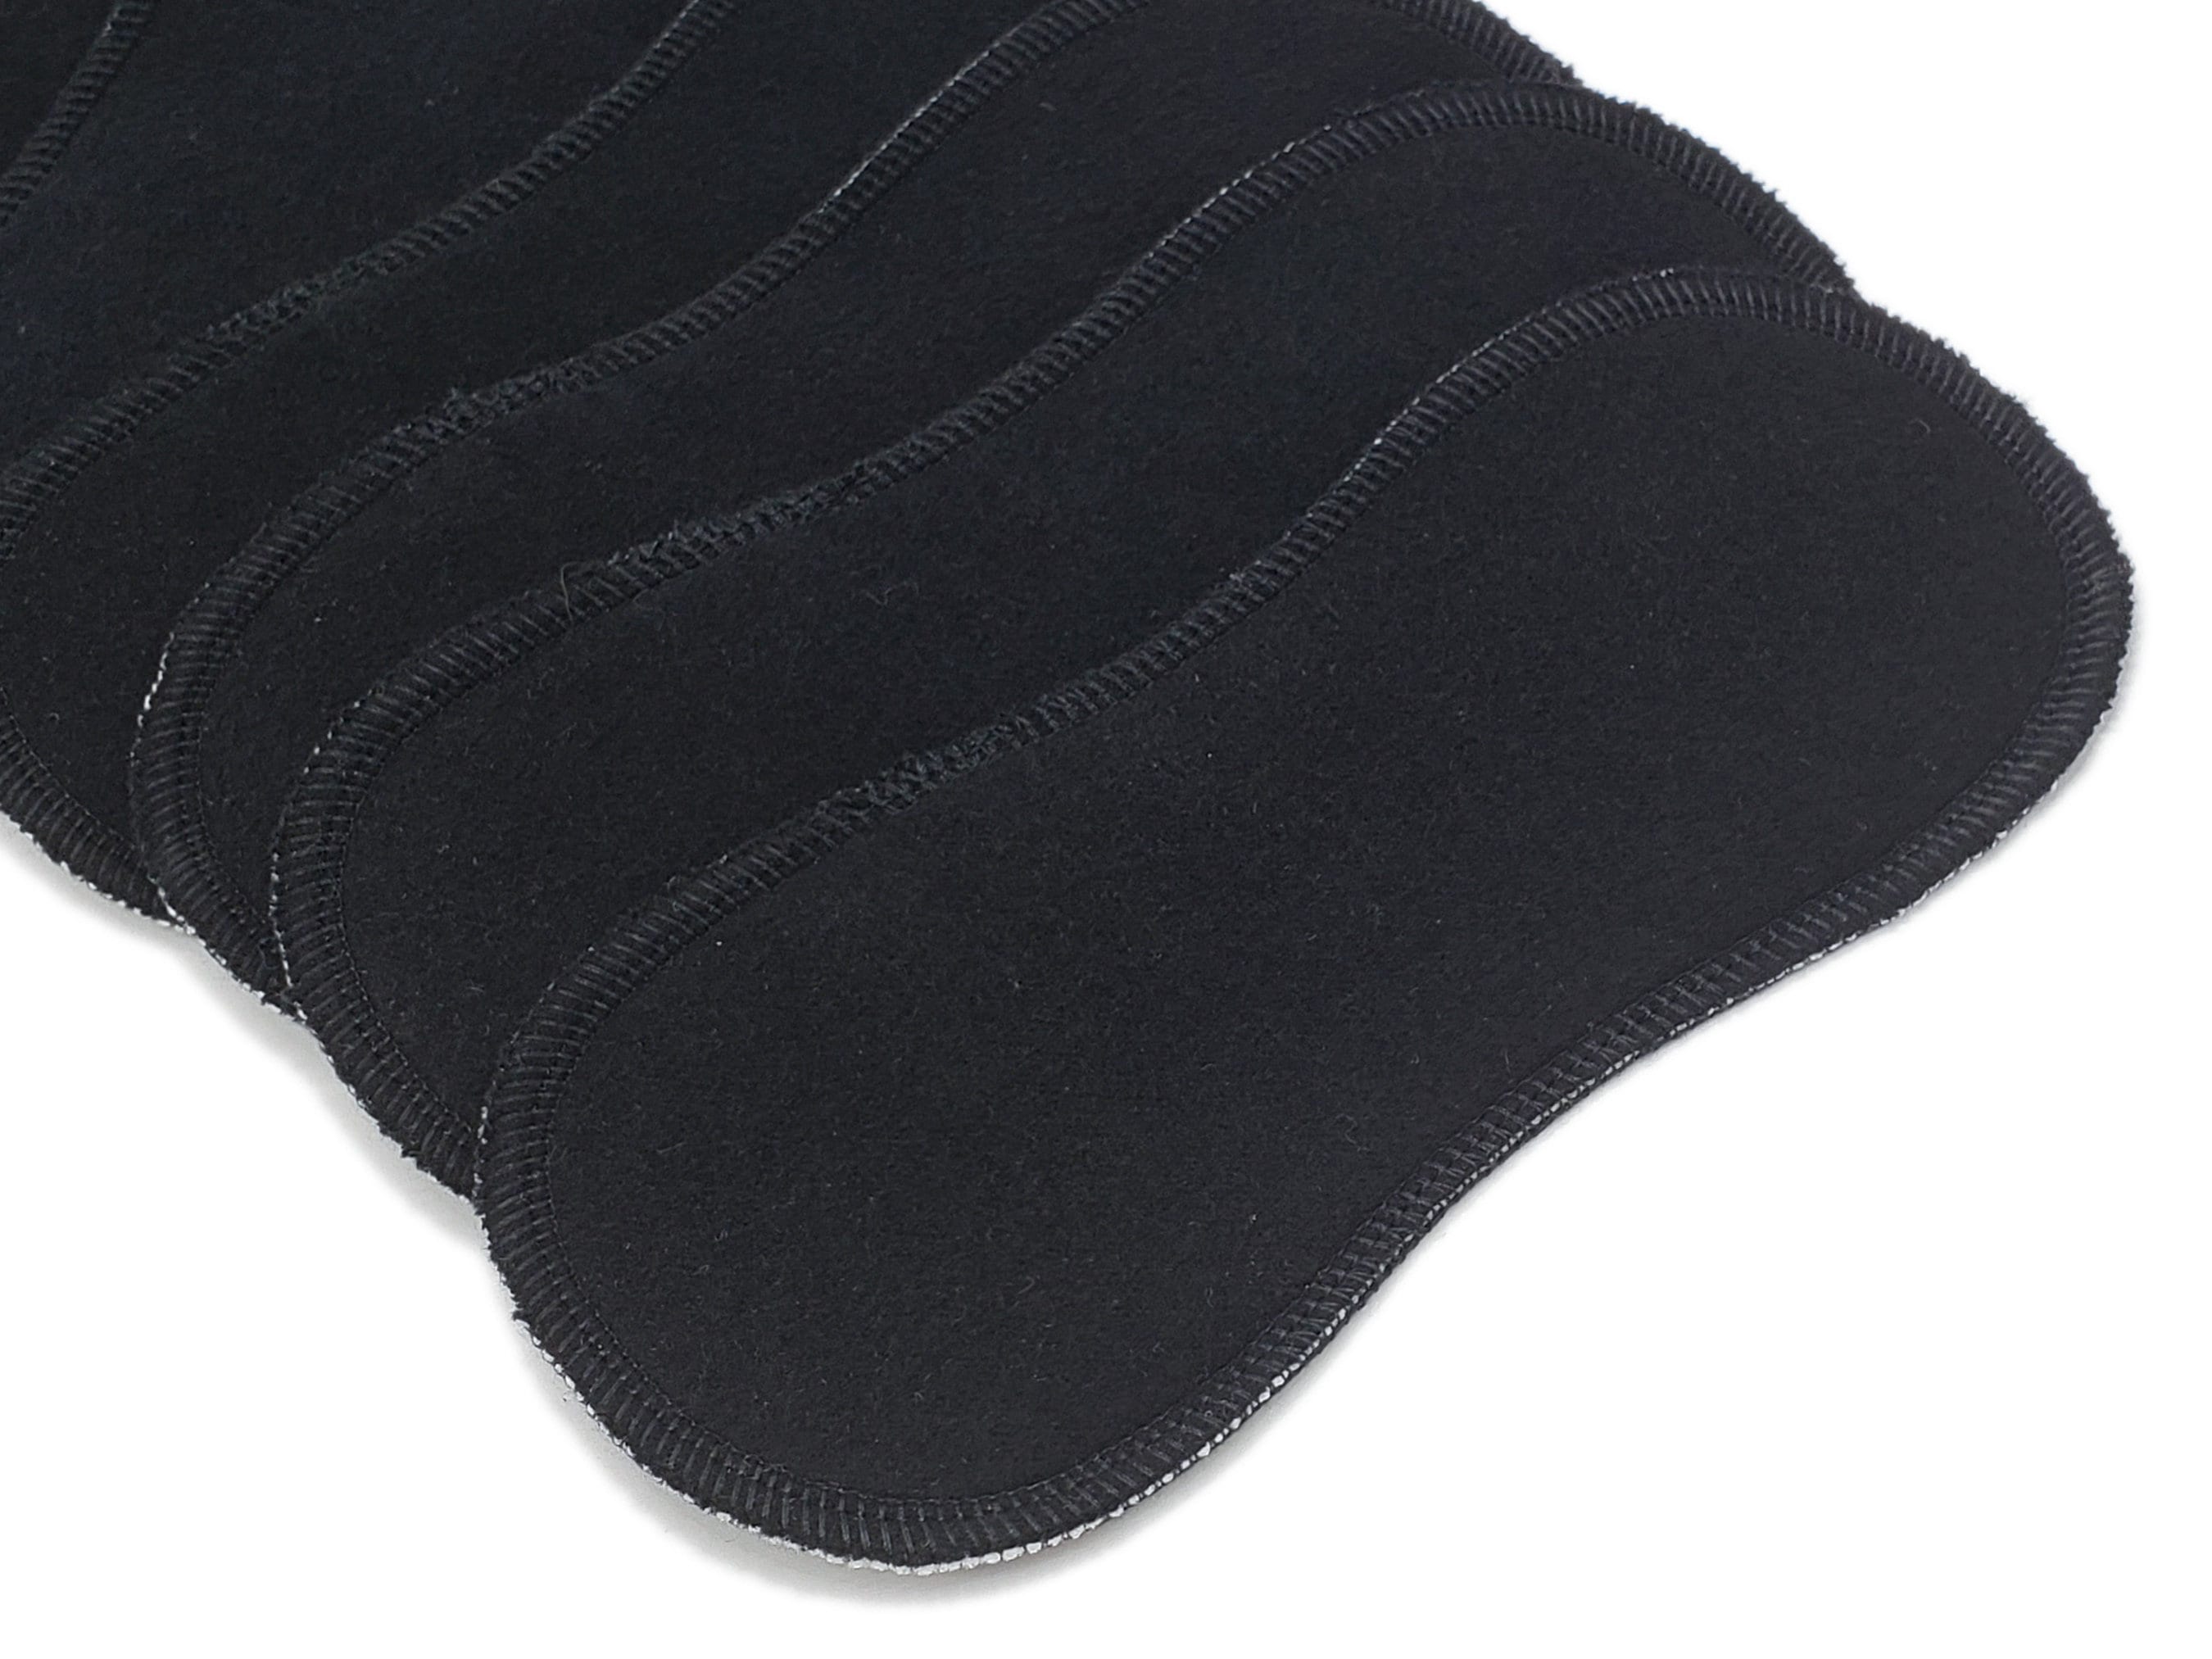 Reusable Wingless Panty Liners 4 Layers 100% Soft Cotton Made to